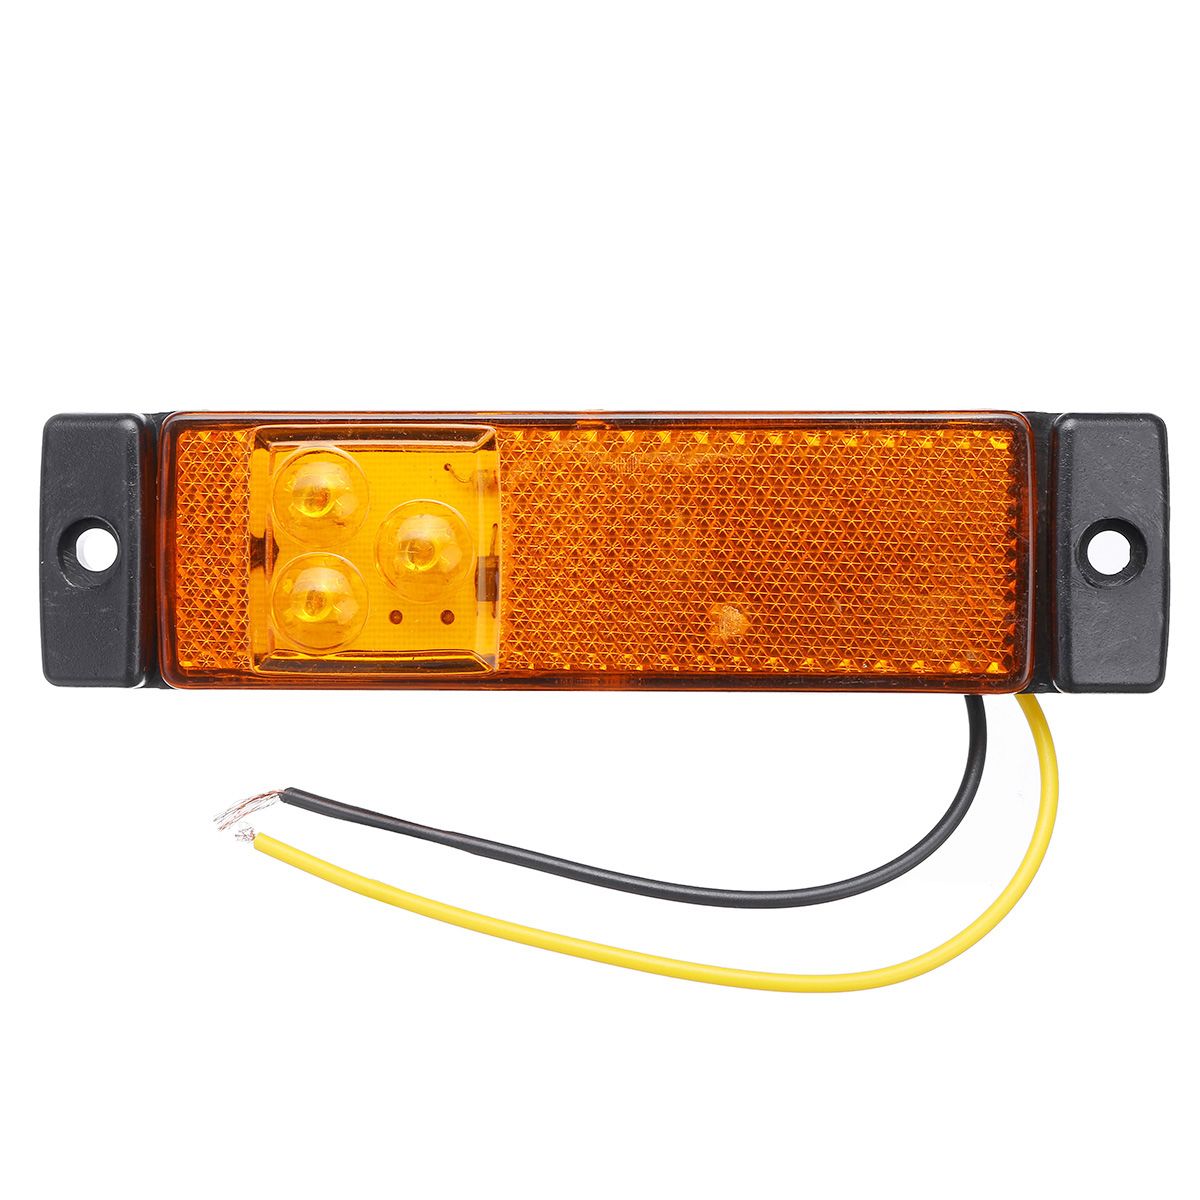 3-LED-Side-Marker-Lights-with-Rear-Reflector-Indicator-12-24V-AmberRedWhite-For-Truck-Lorry-Trailer-1603836